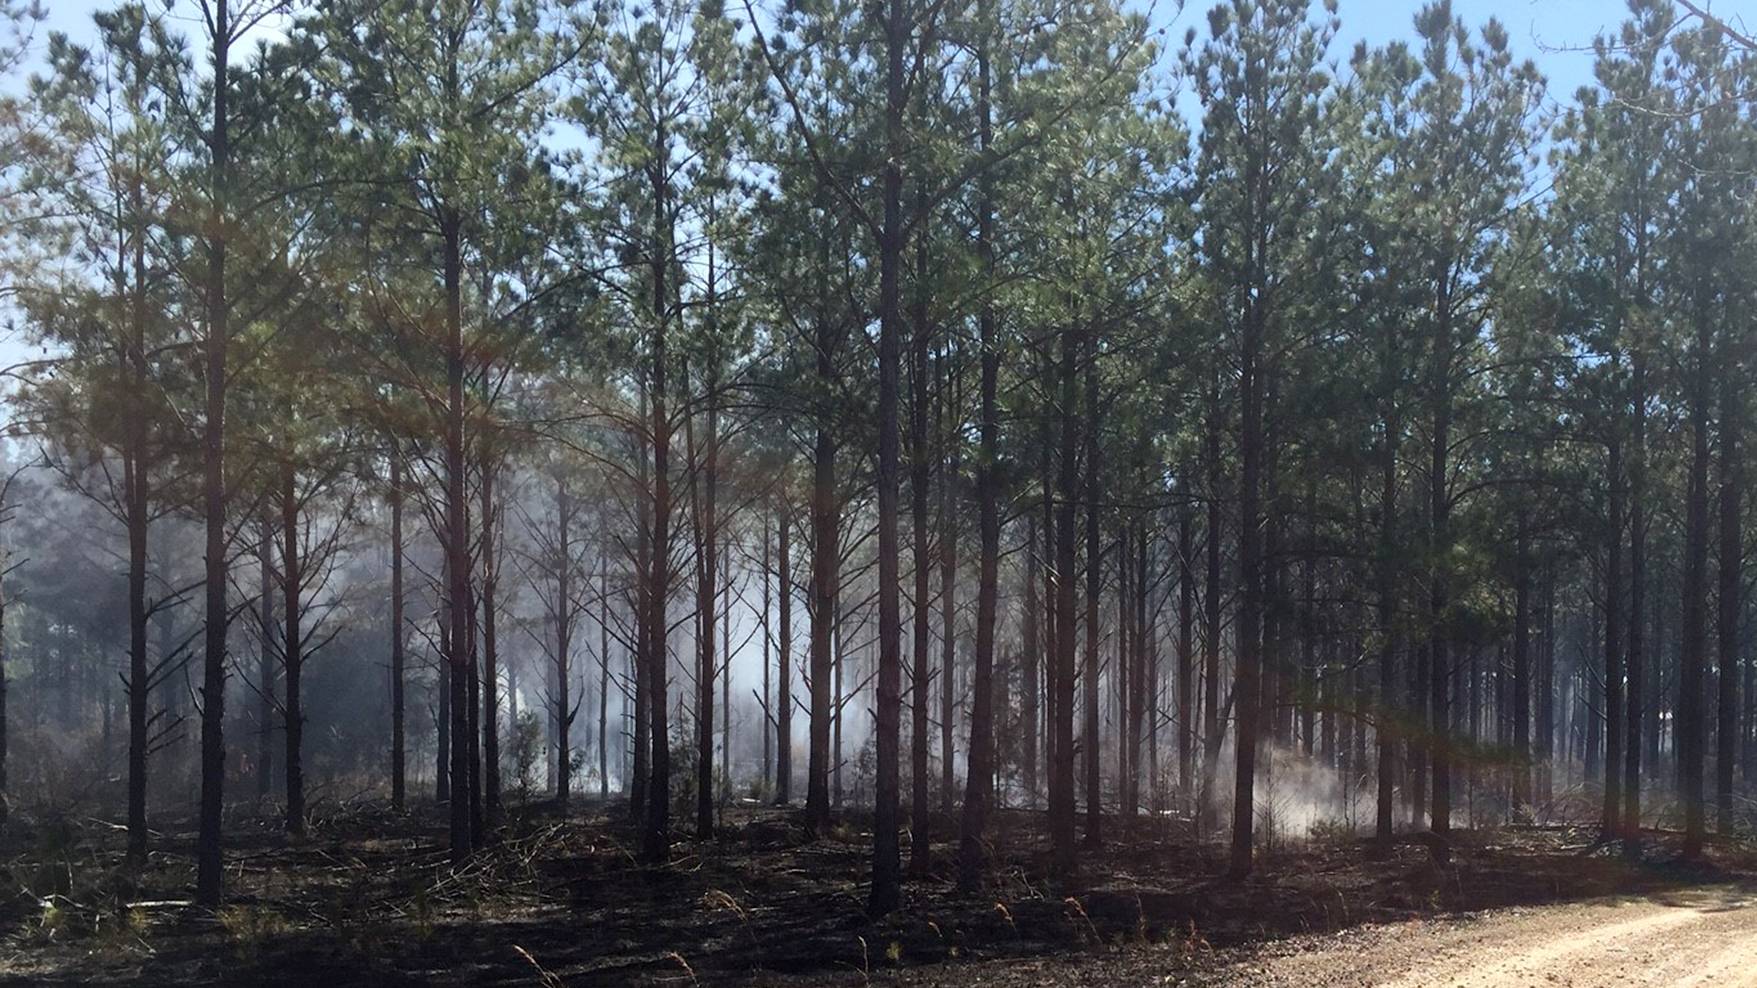 Prescribed burns can reduce the fuel available in forest land, significantly lessening the risk of an unmanaged forest fire. (Submitted Photo by Matt Walters)